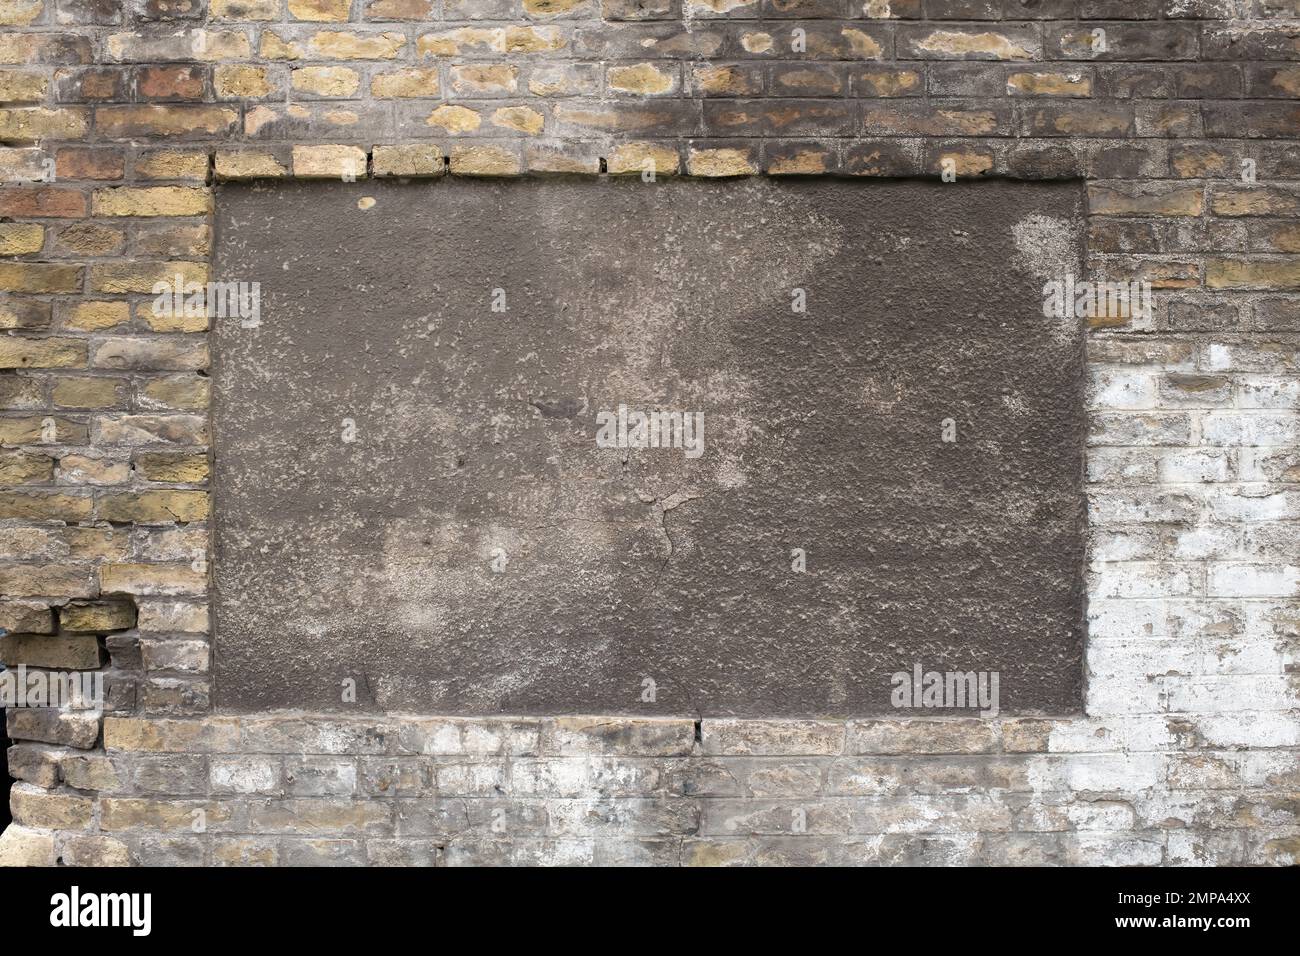 An old brick wall in English bond laid with alternating courses of headers and stretchers. Stock Photo